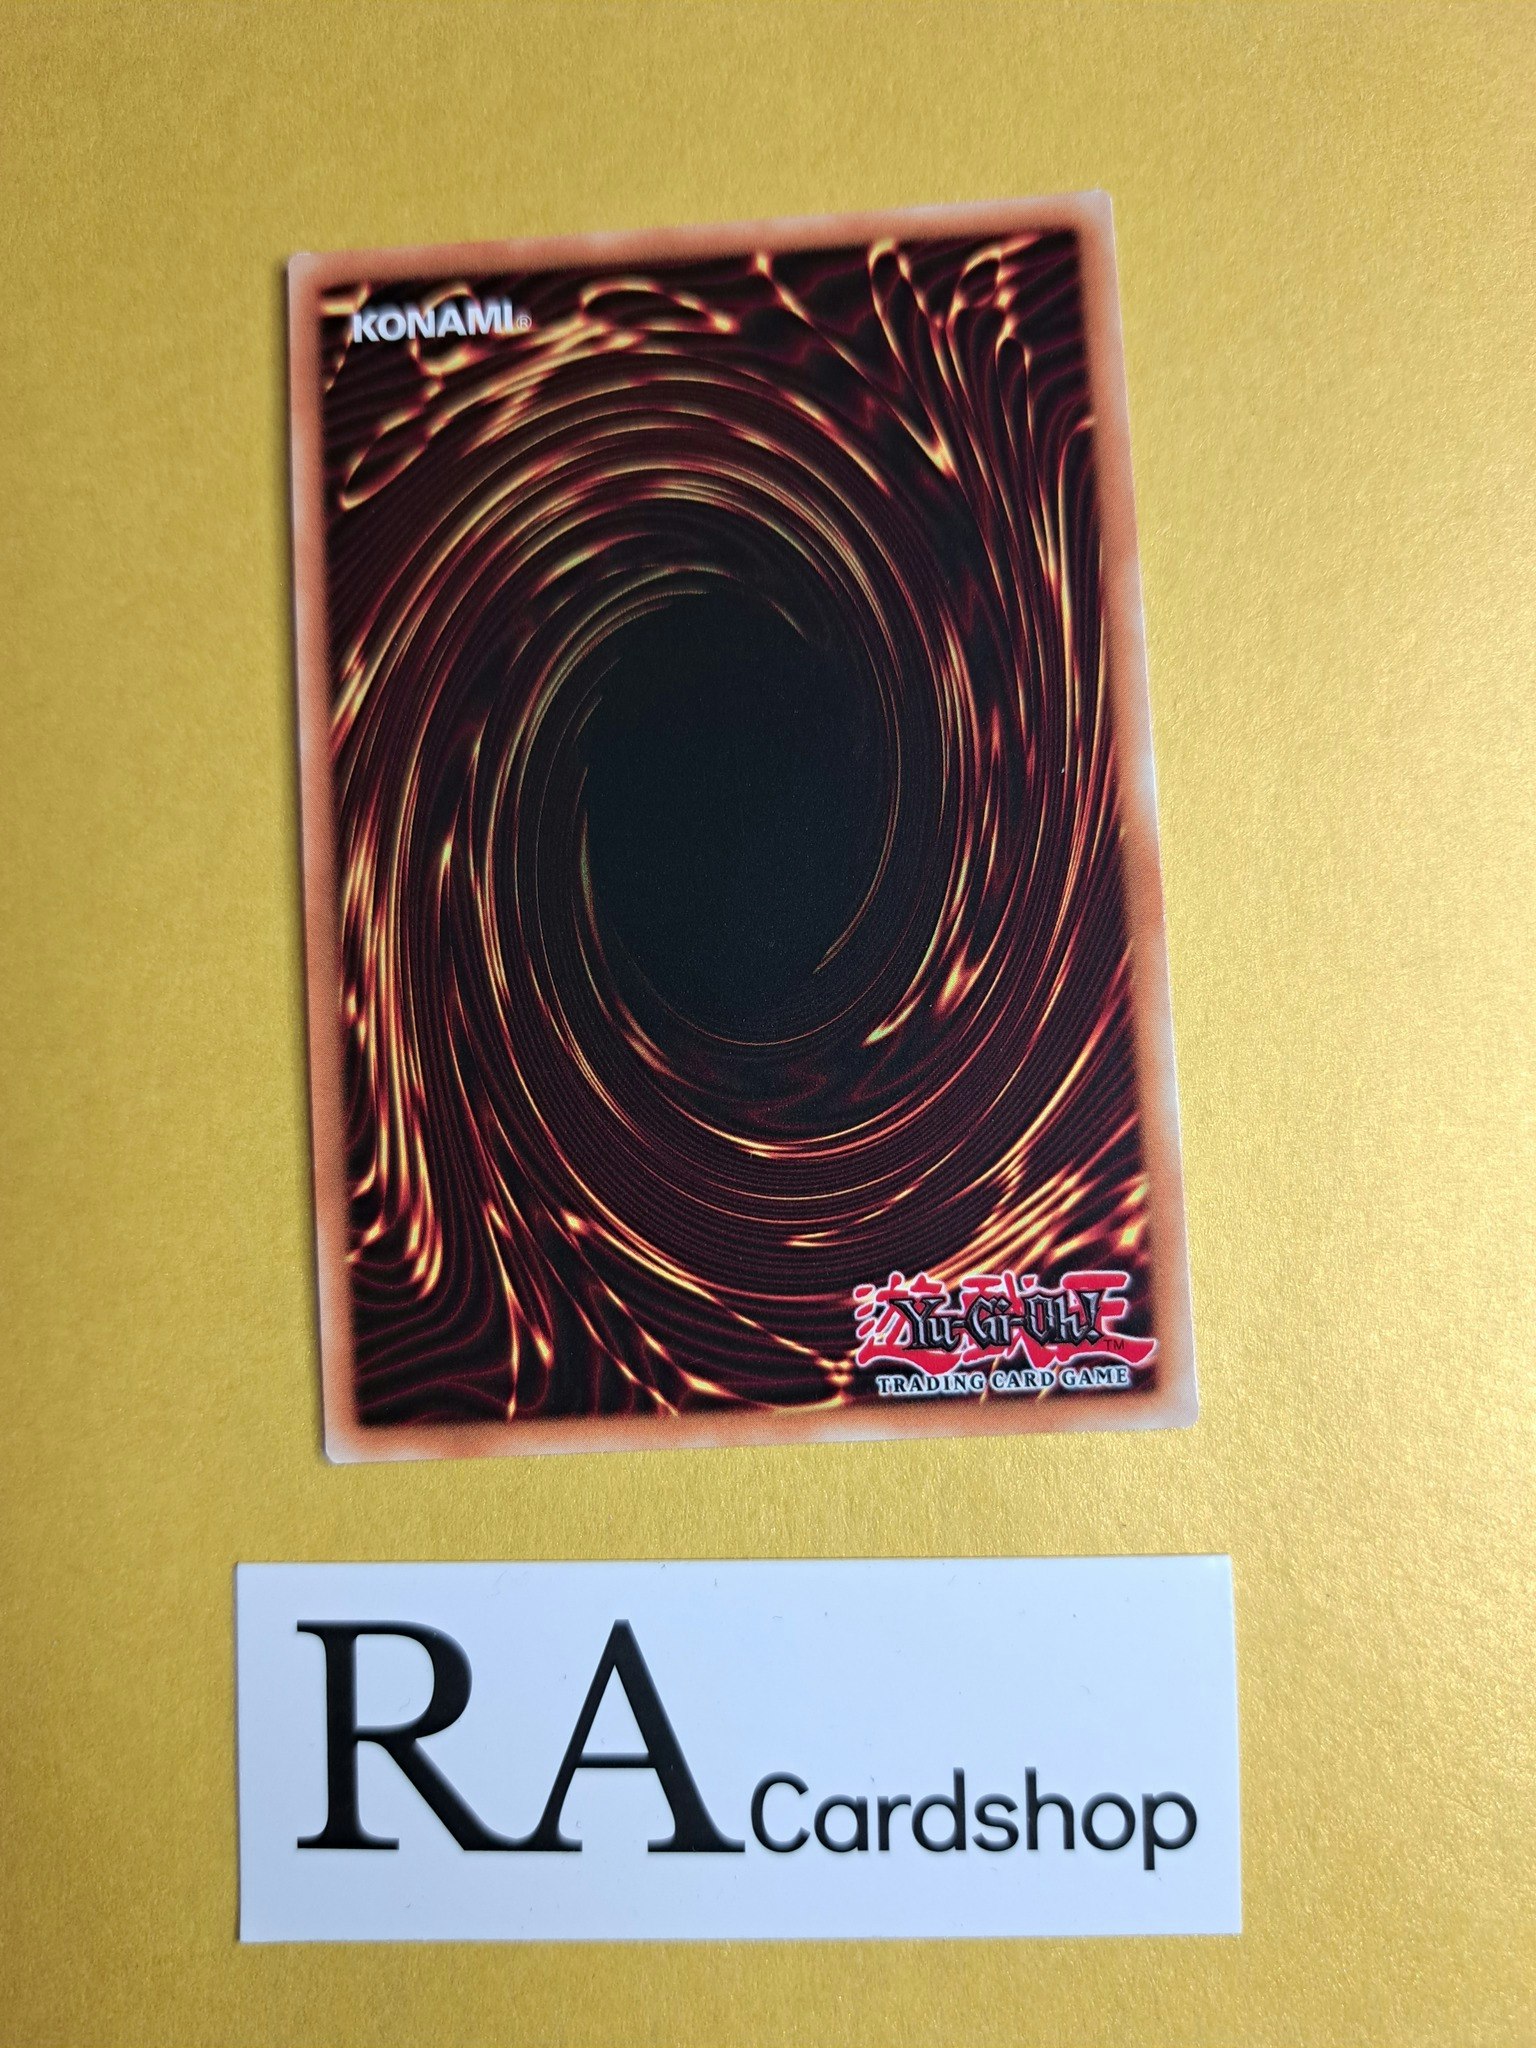 Primathmech Laplacian 1st Edition EN146 Ghosts From the Past: The 2nd Haunting GFP2 Yu-Gi-Oh